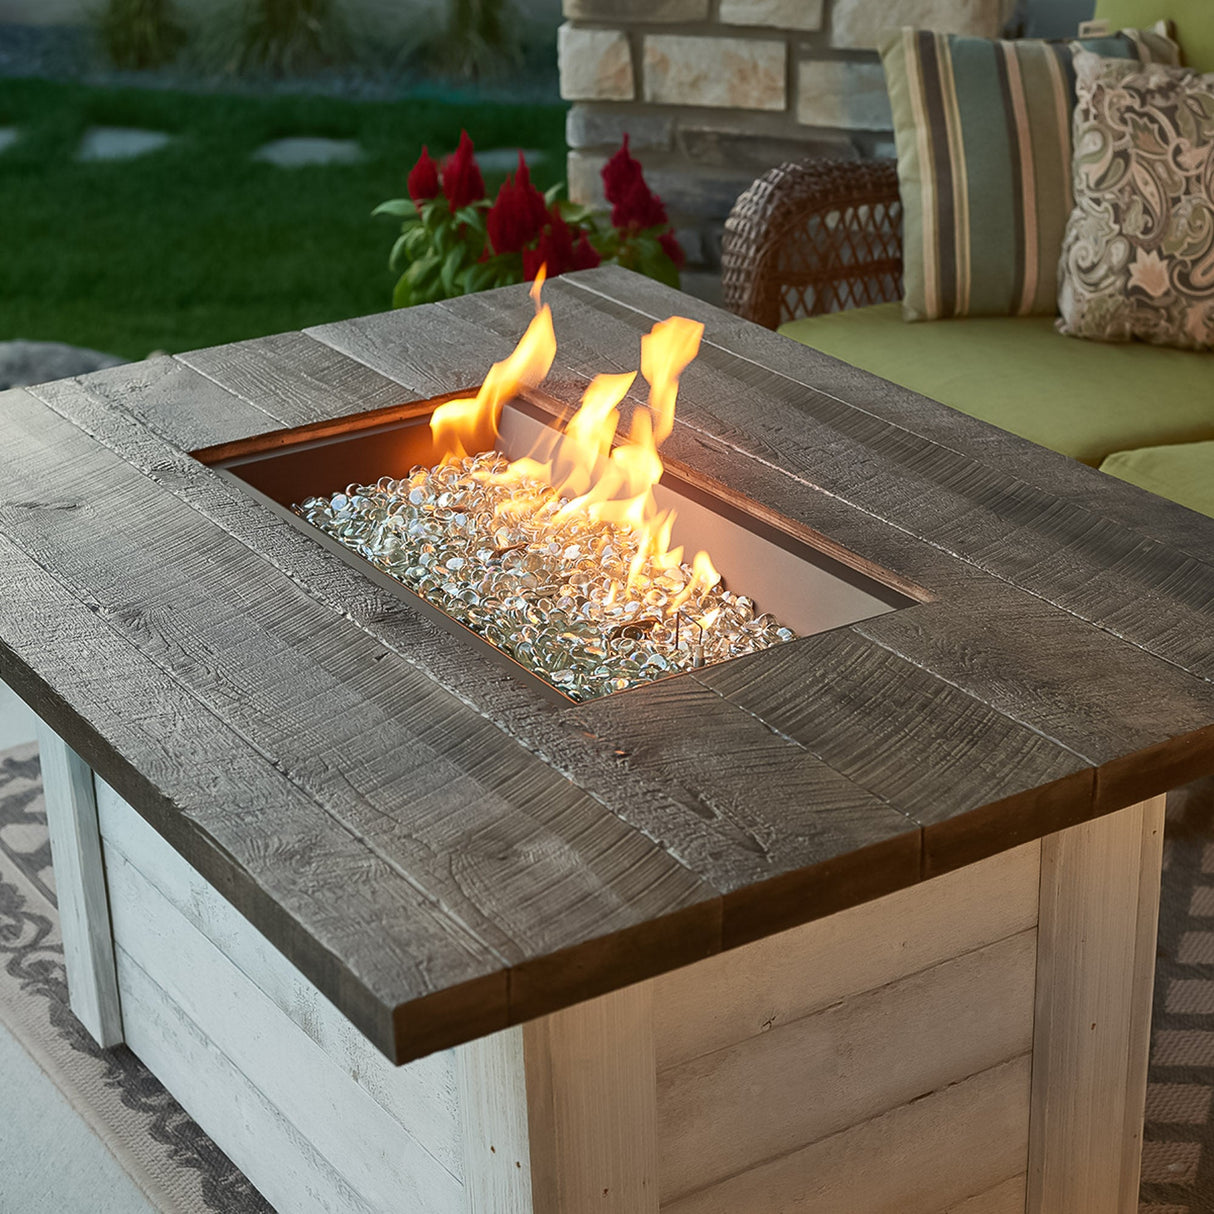 A Alcott Rectangular Gas Fire Pit Table placed in an outdoor space with a large flame